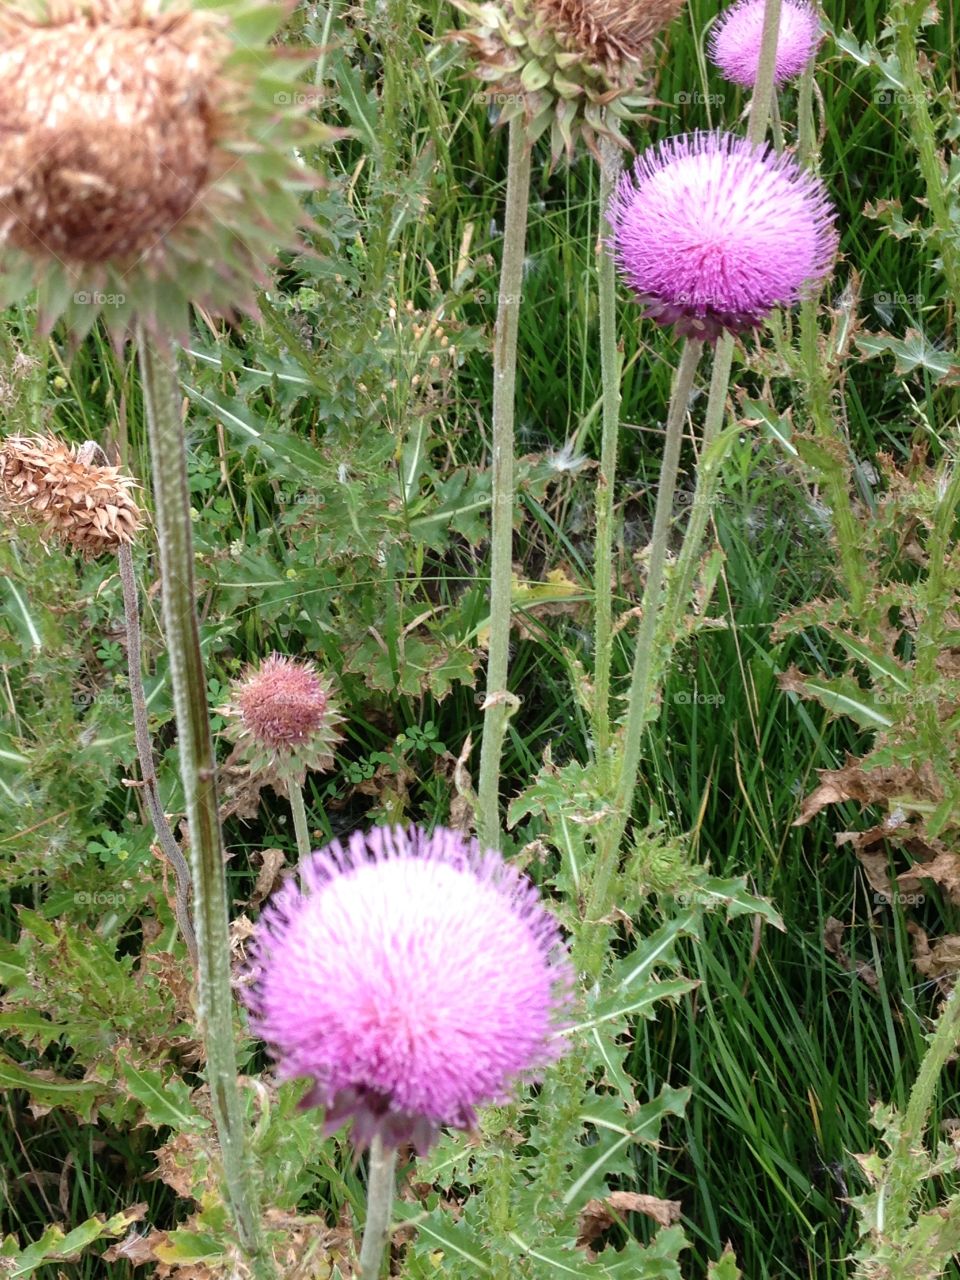 Thistle bloom. Blooming thistle